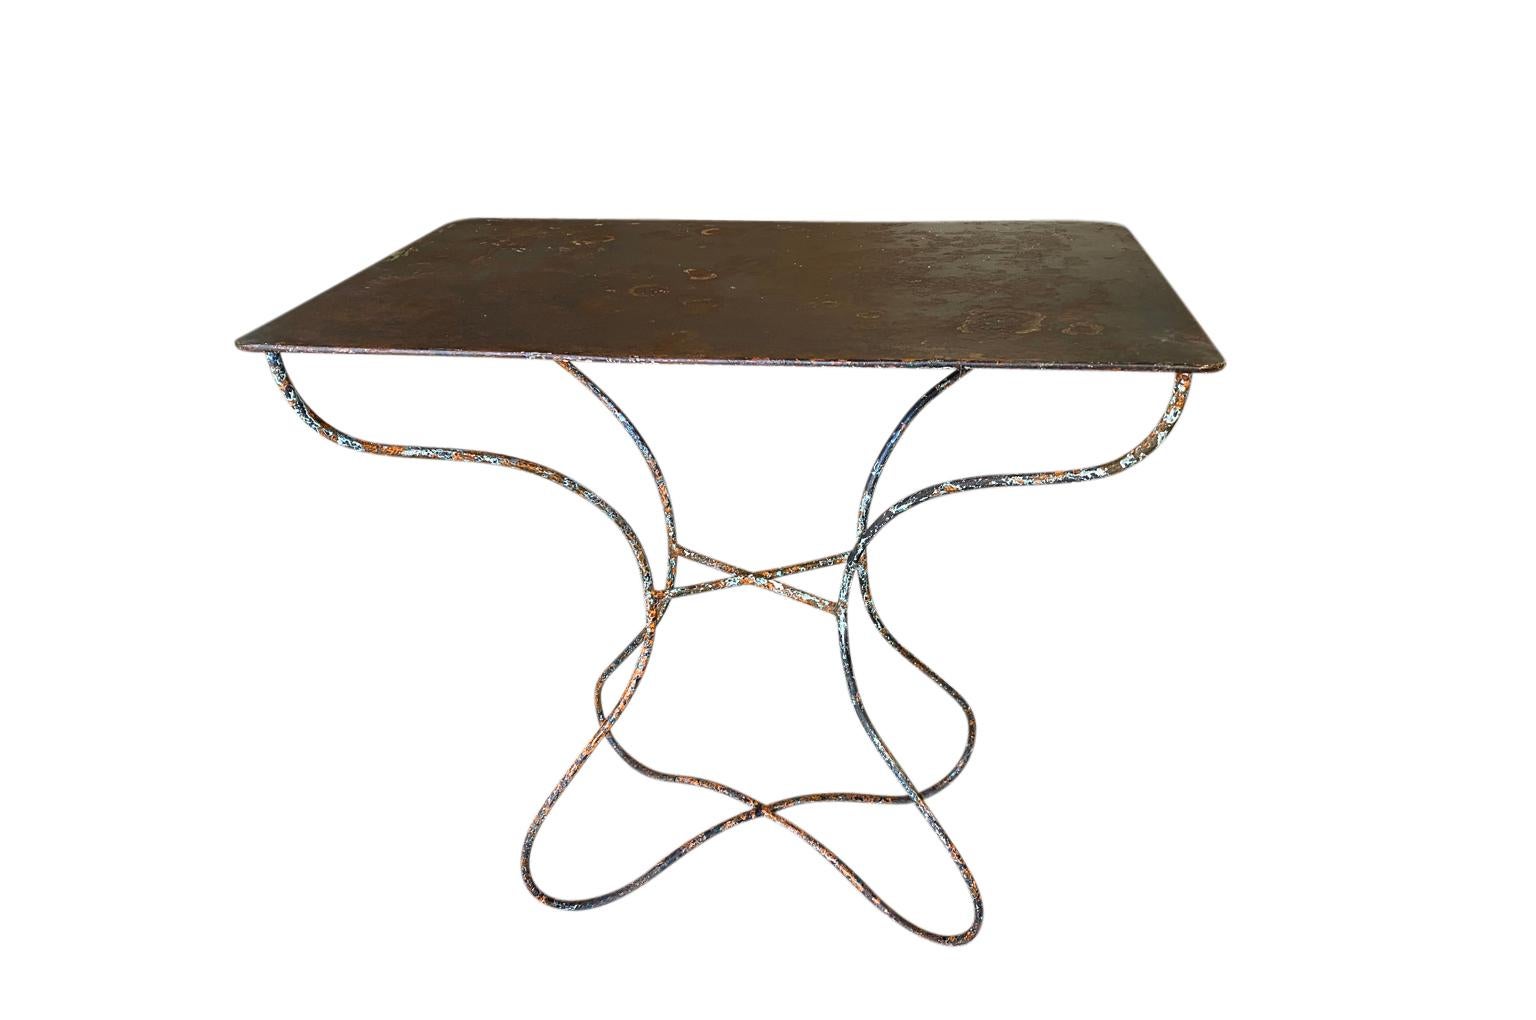 A wonderful 19th century garden table from the Provence region of France. Soundly constructed from iron with a very beautiful and unusually shaped legs. Very sturdy with wonderful patina.